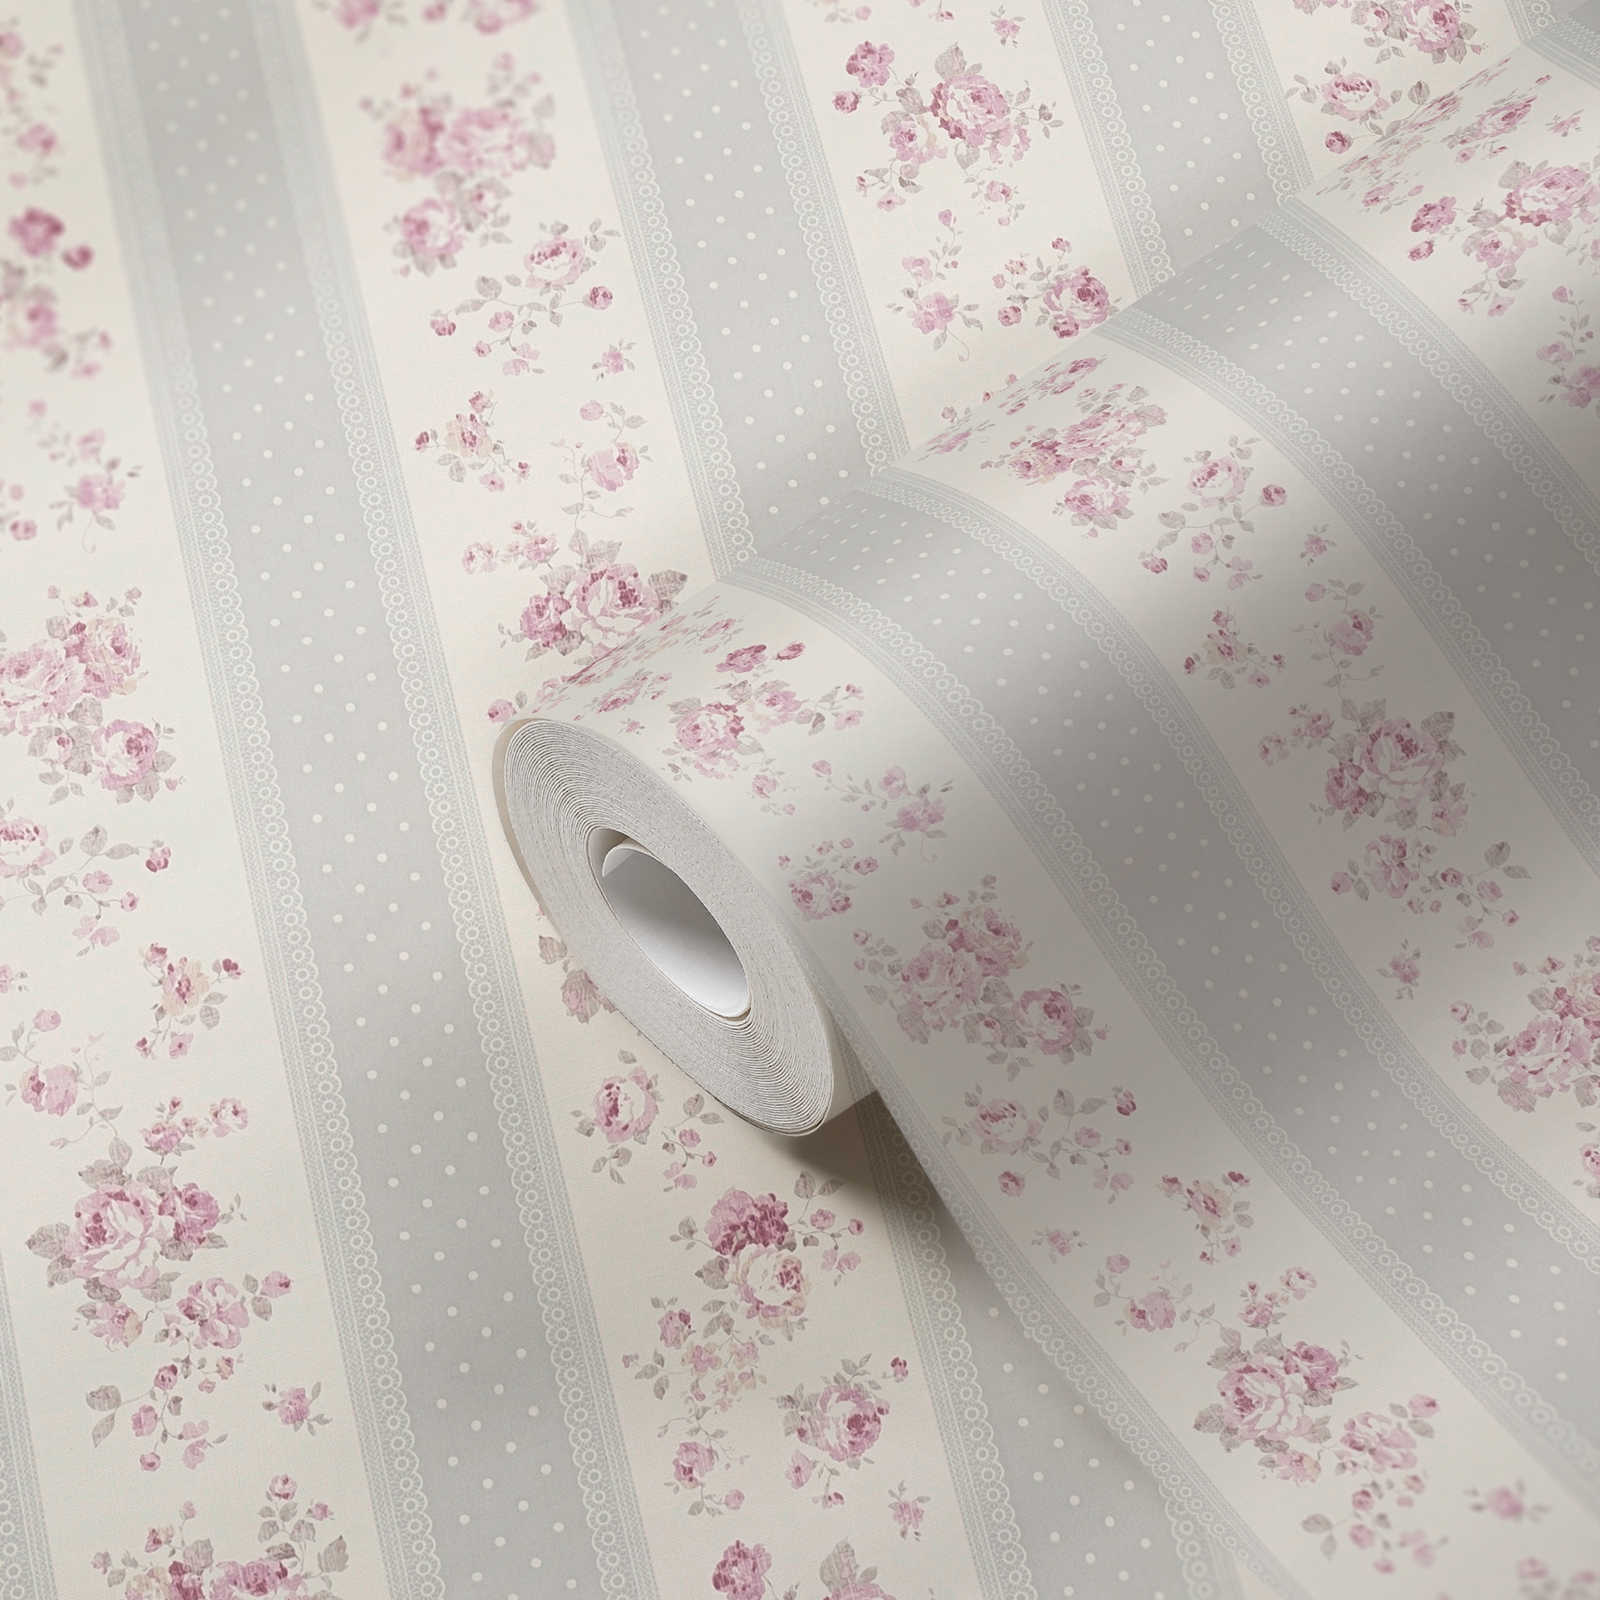             Striped wallpaper with flowers and dot pattern - grey, white, pink
        